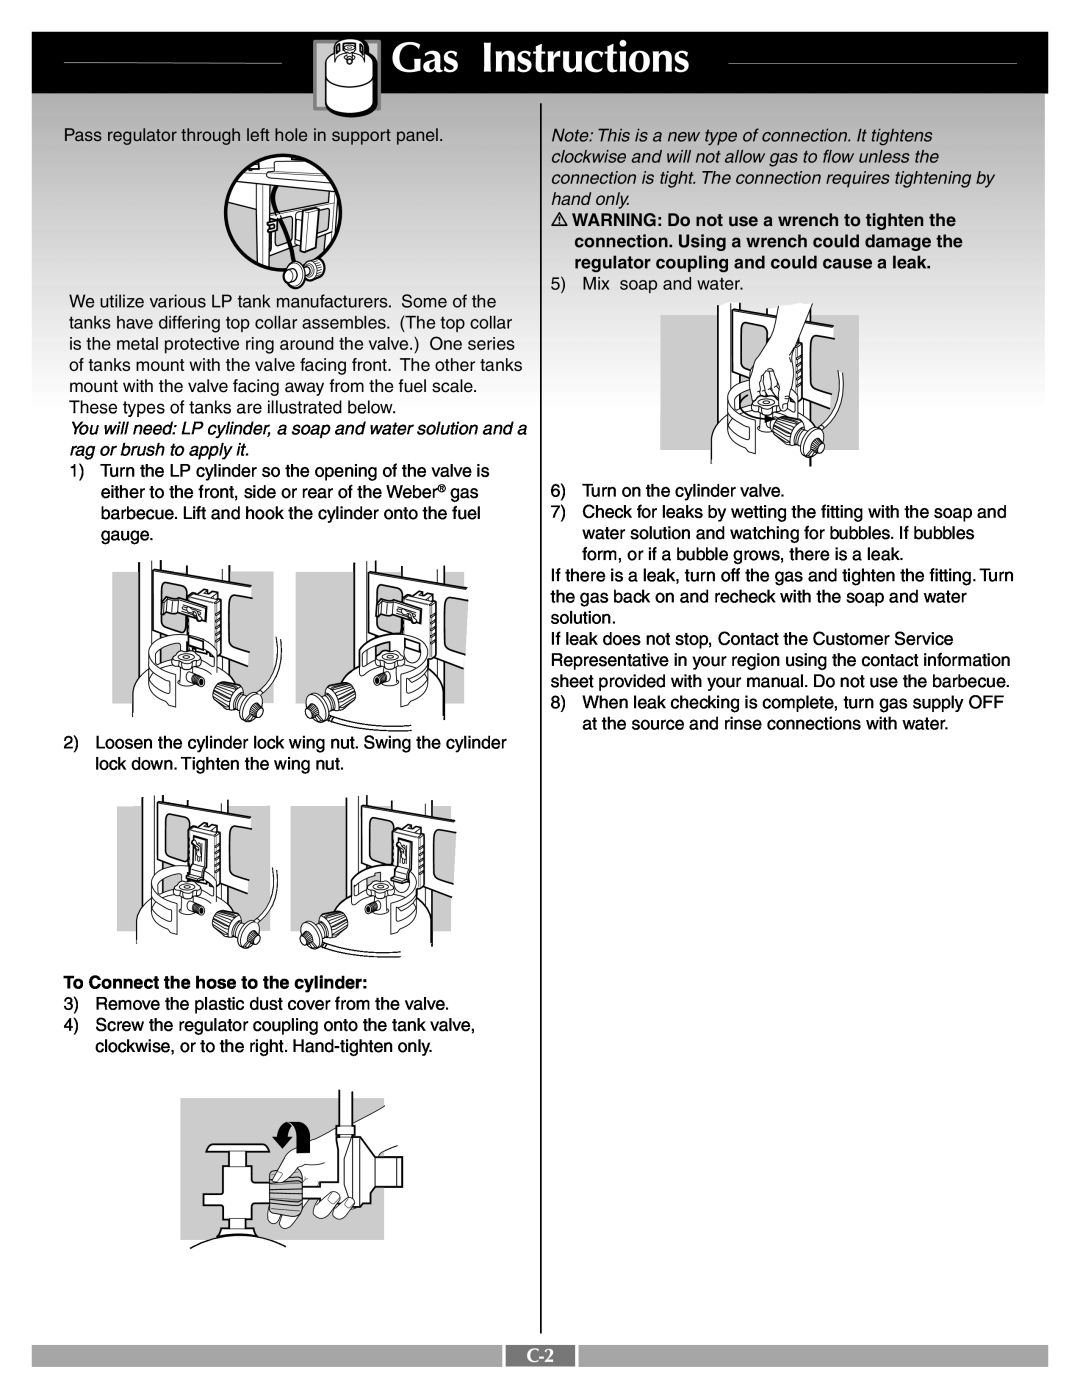 Weber 55249 Gas Instructions, Note This is a new type of connection. It tightens, hand only, rag or brush to apply it 